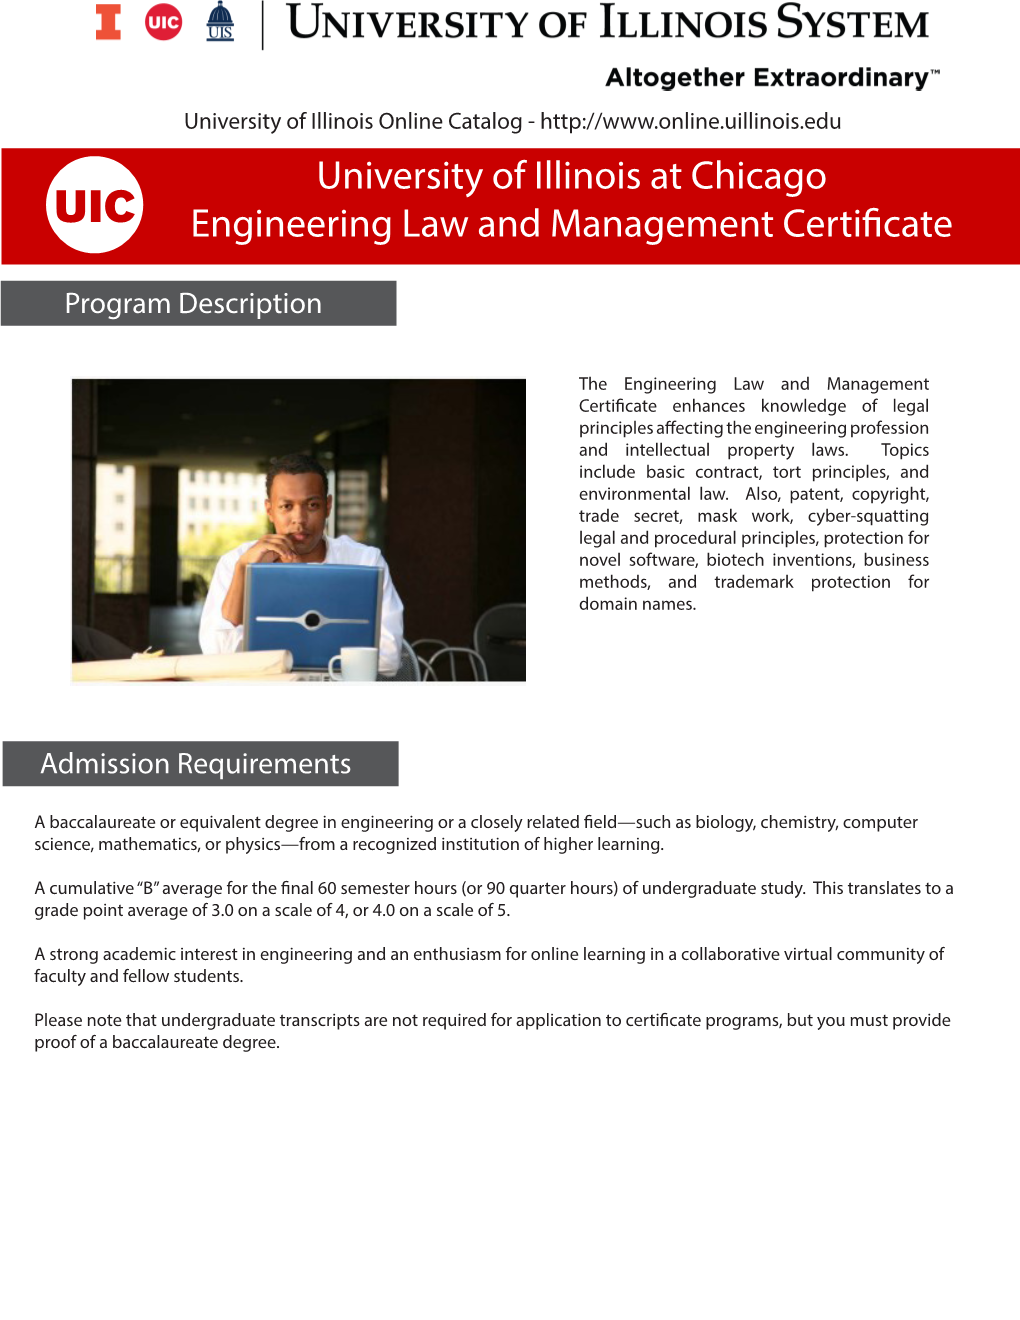 University of Illinois at Chicago Engineering Law and Management